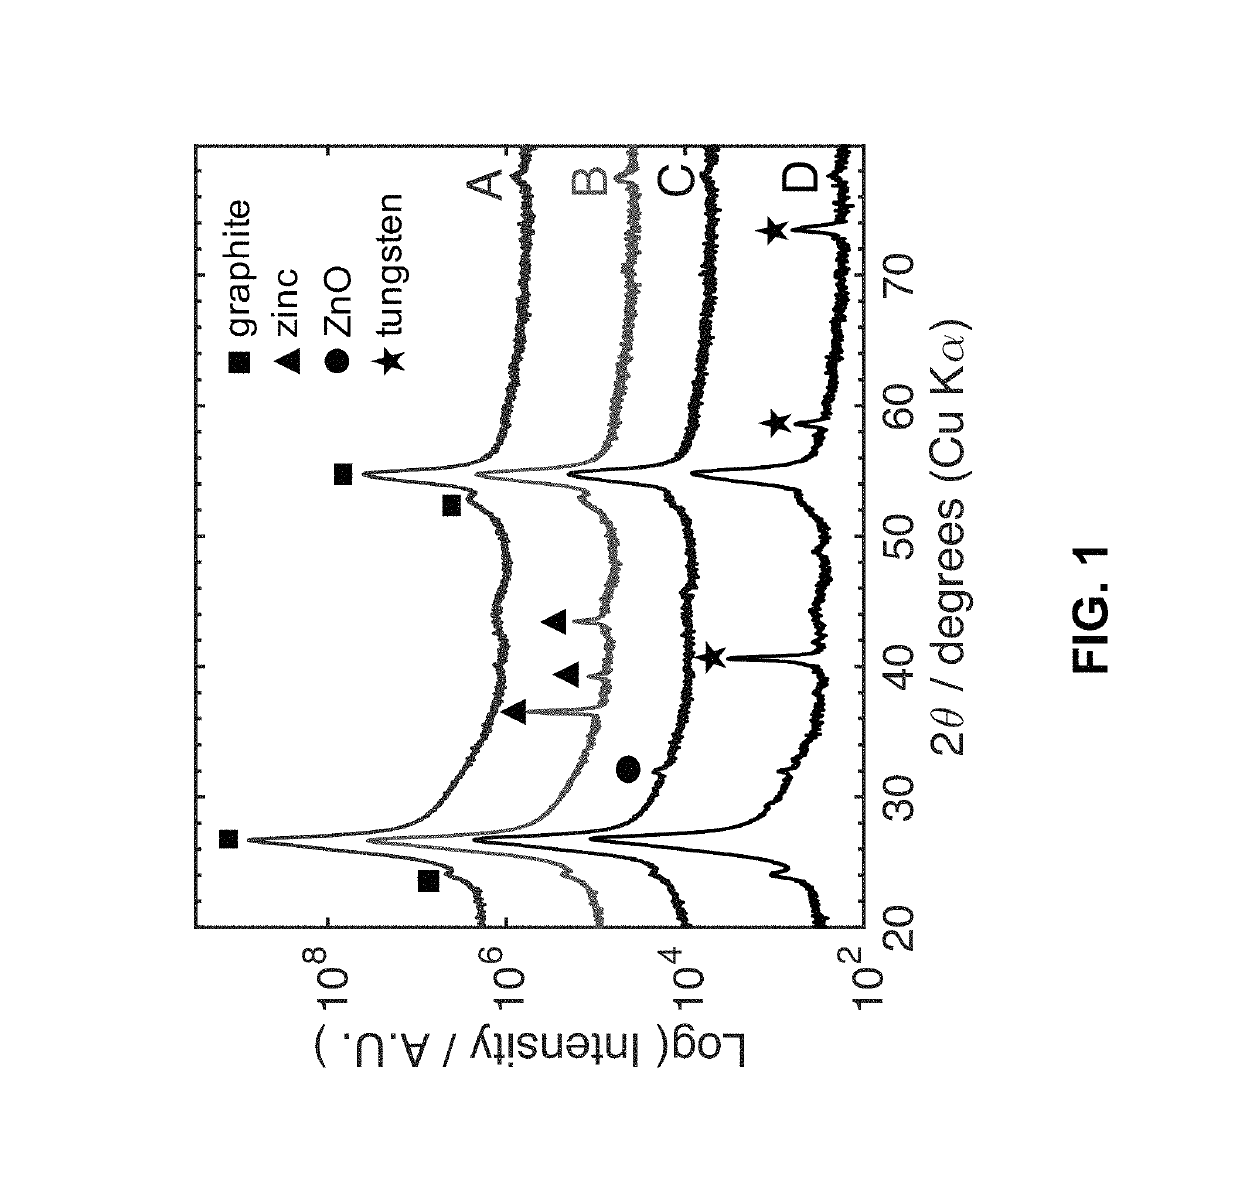 Electroless process for depositing refractory metals